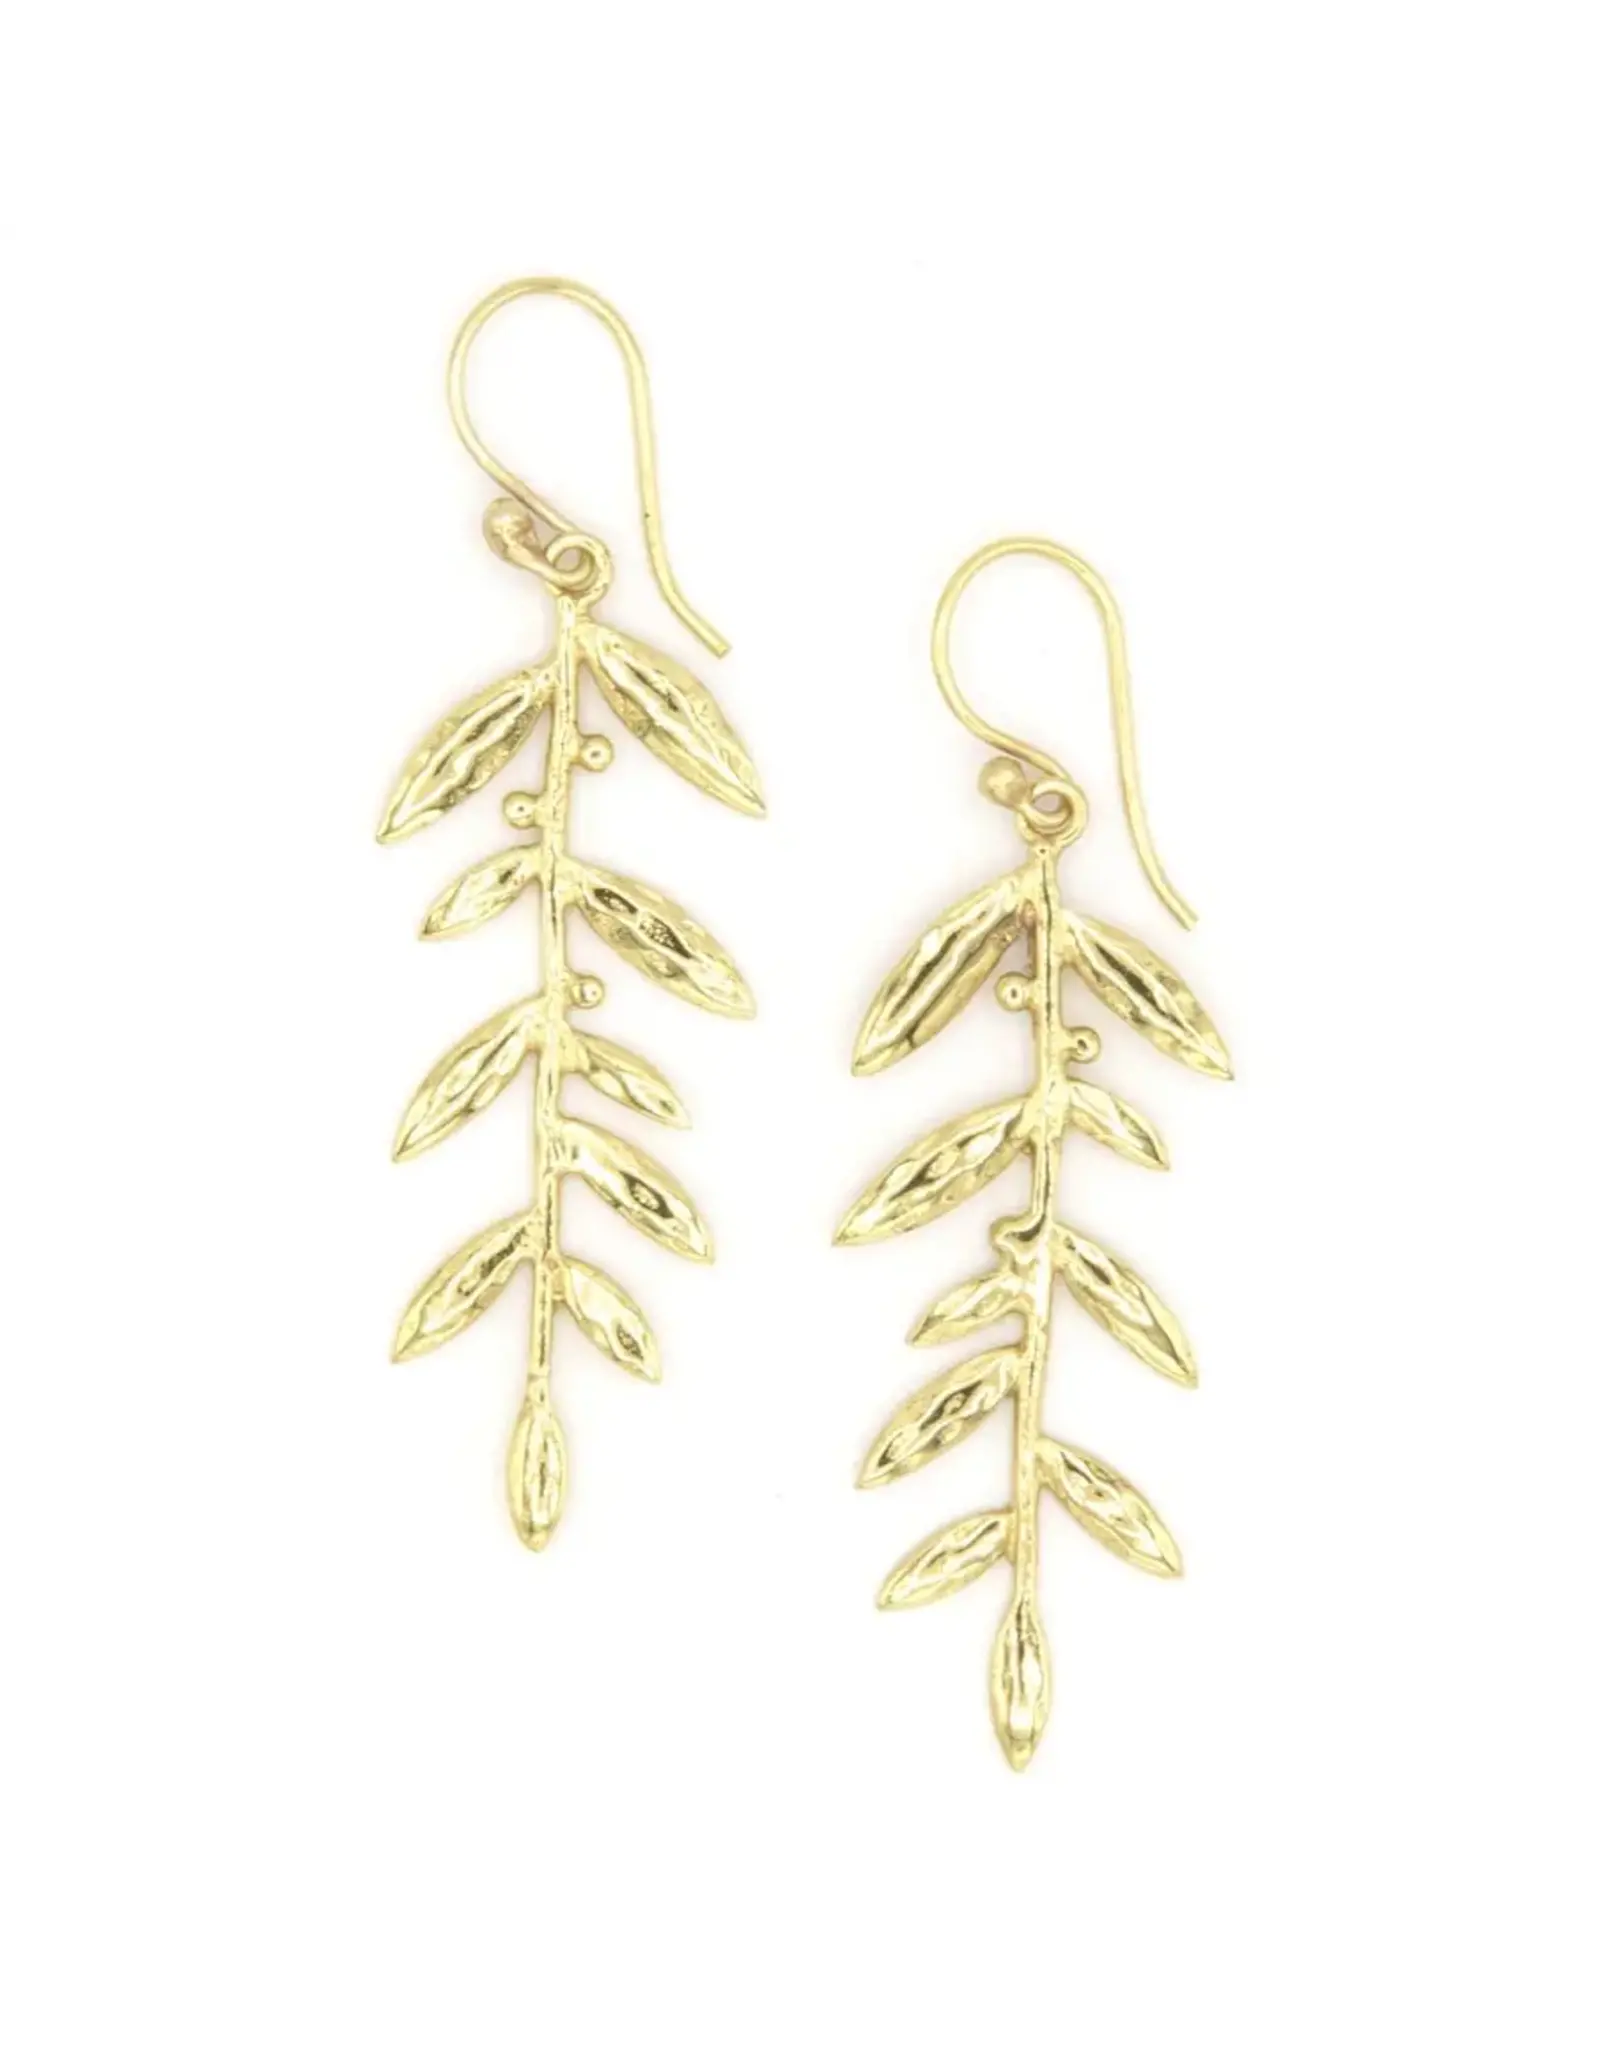 India Luxe Leaf Drop Earrings, India